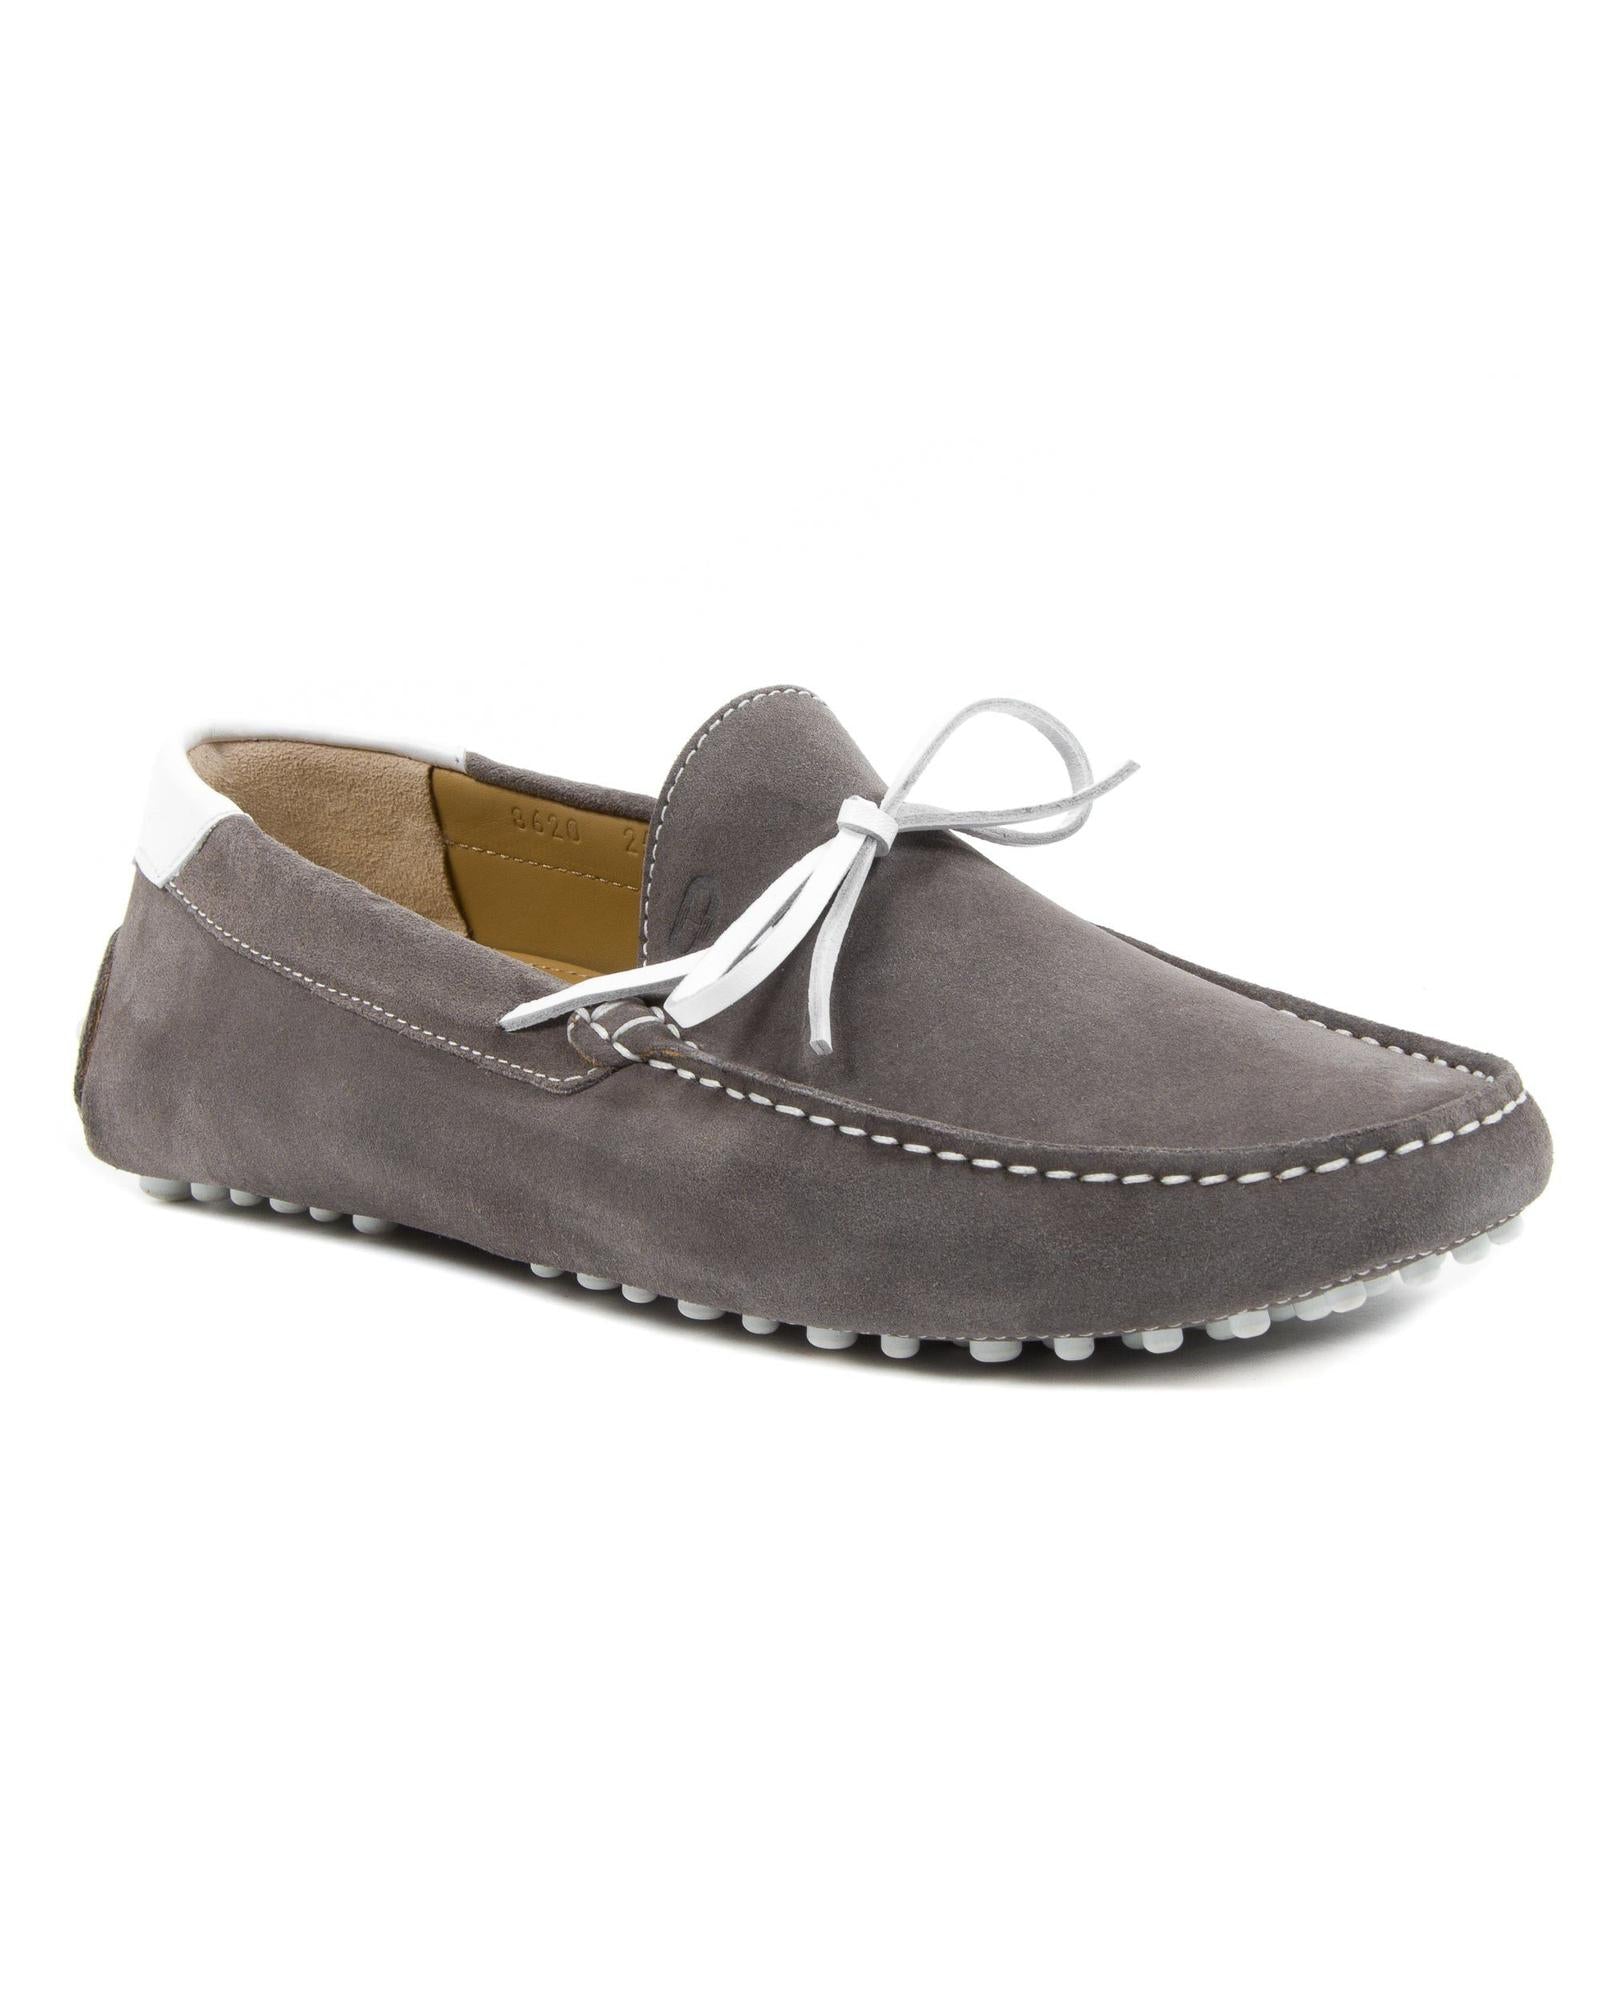 Hand-Stitched Suede Loafers with Rubber Soles - 43 EU